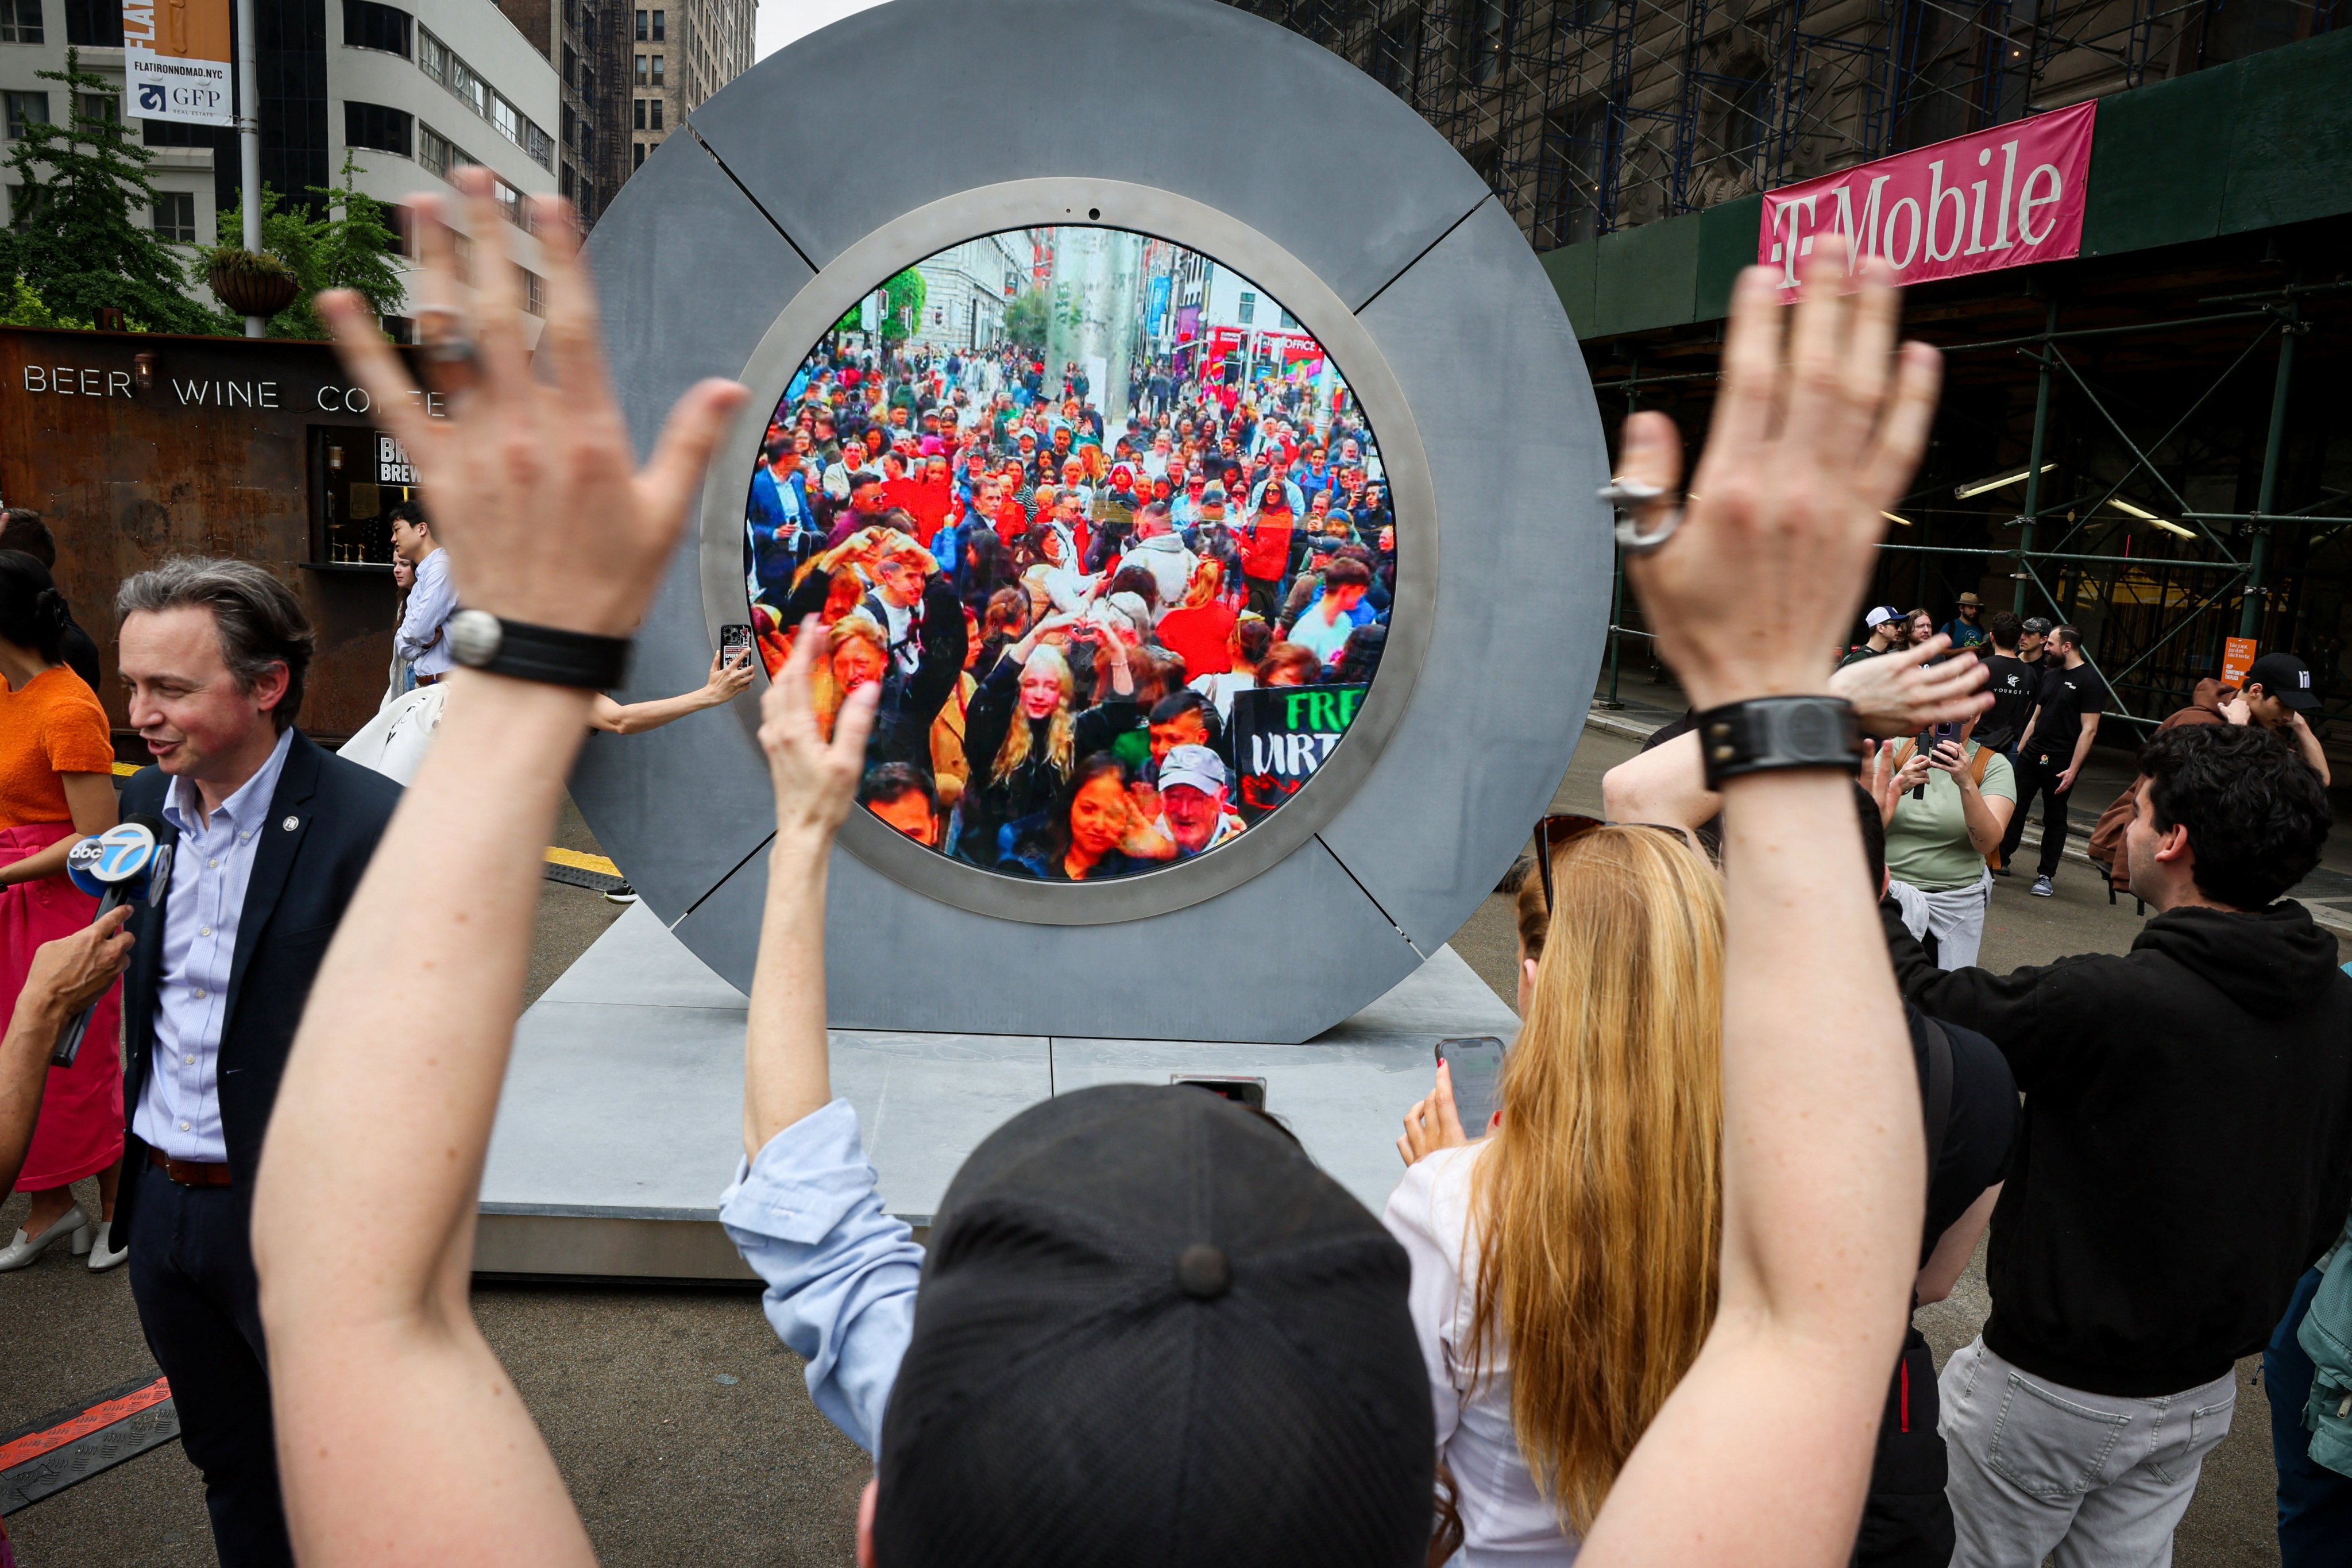 New Yorkers greet people in Dublin via a Portal in Manhattan. Photo: Reuters